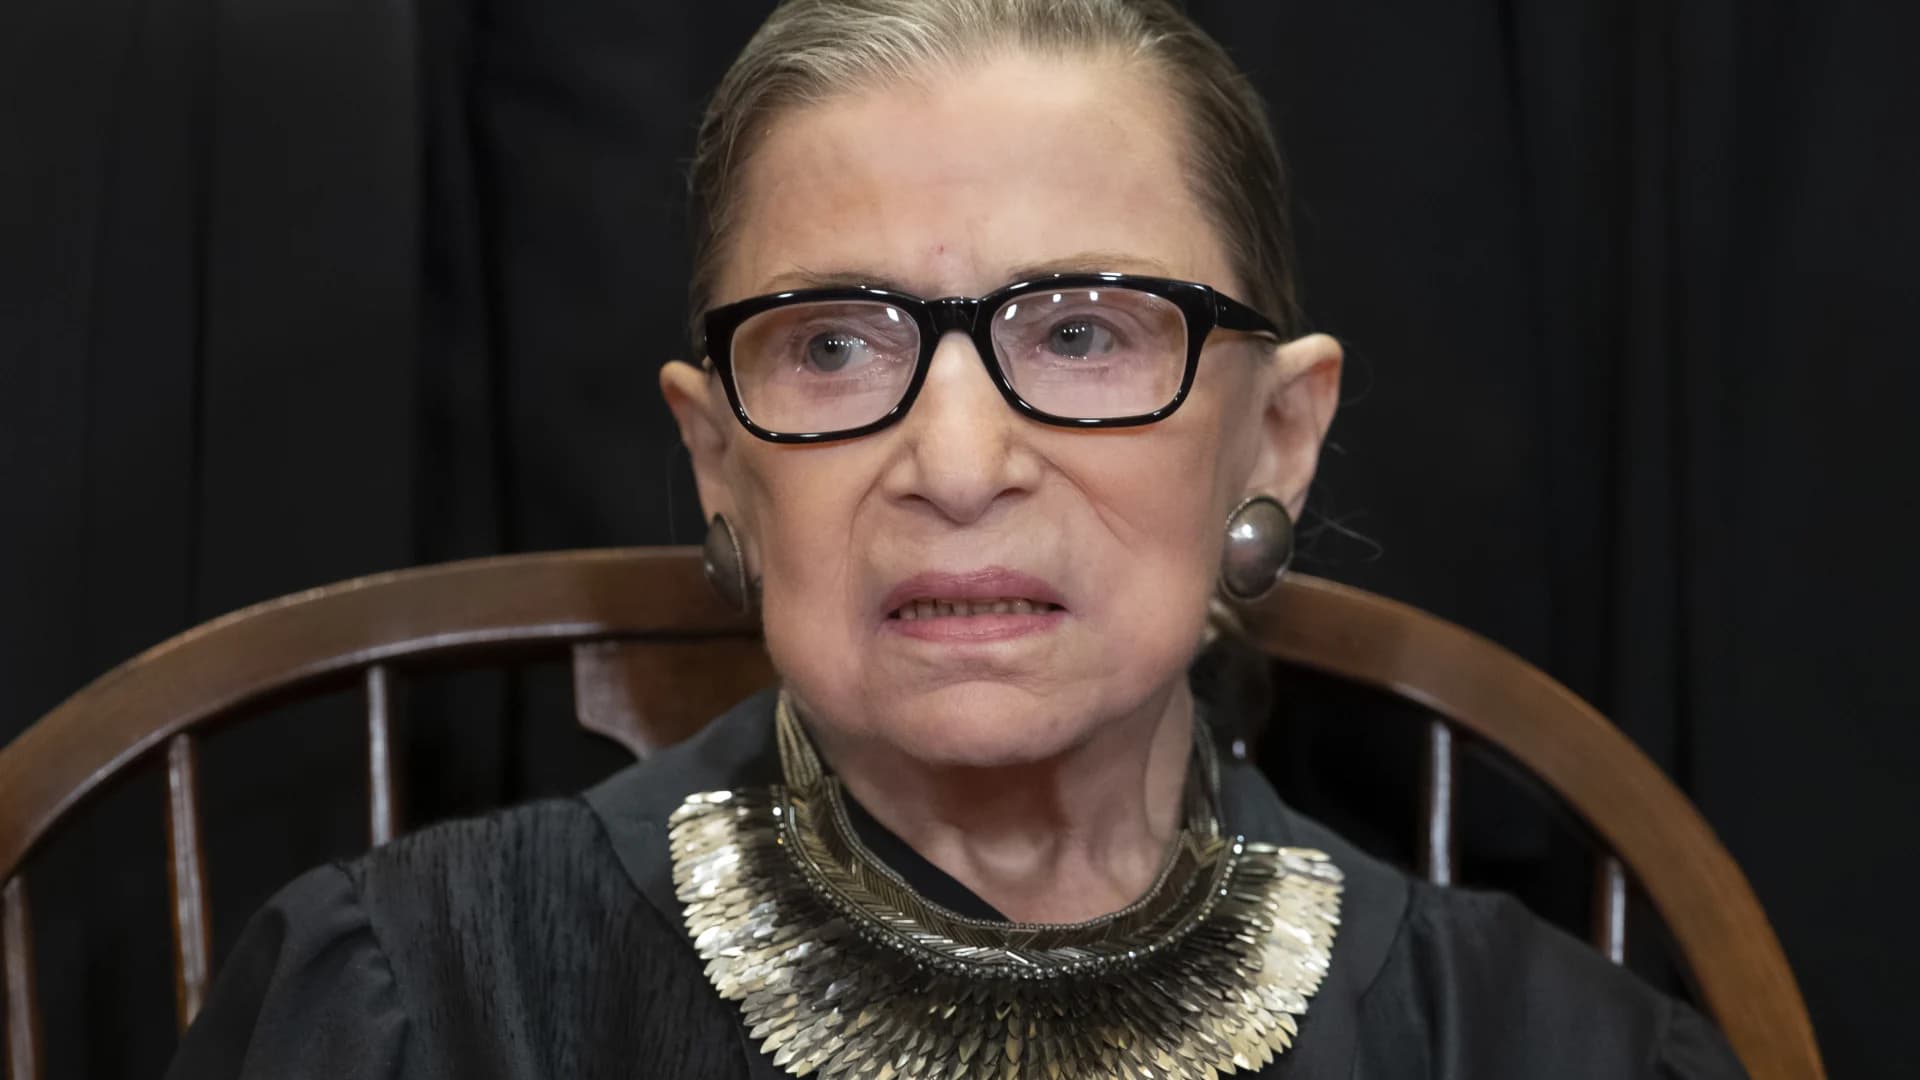 Local leaders pay tribute to Ruth Bader Ginsburg